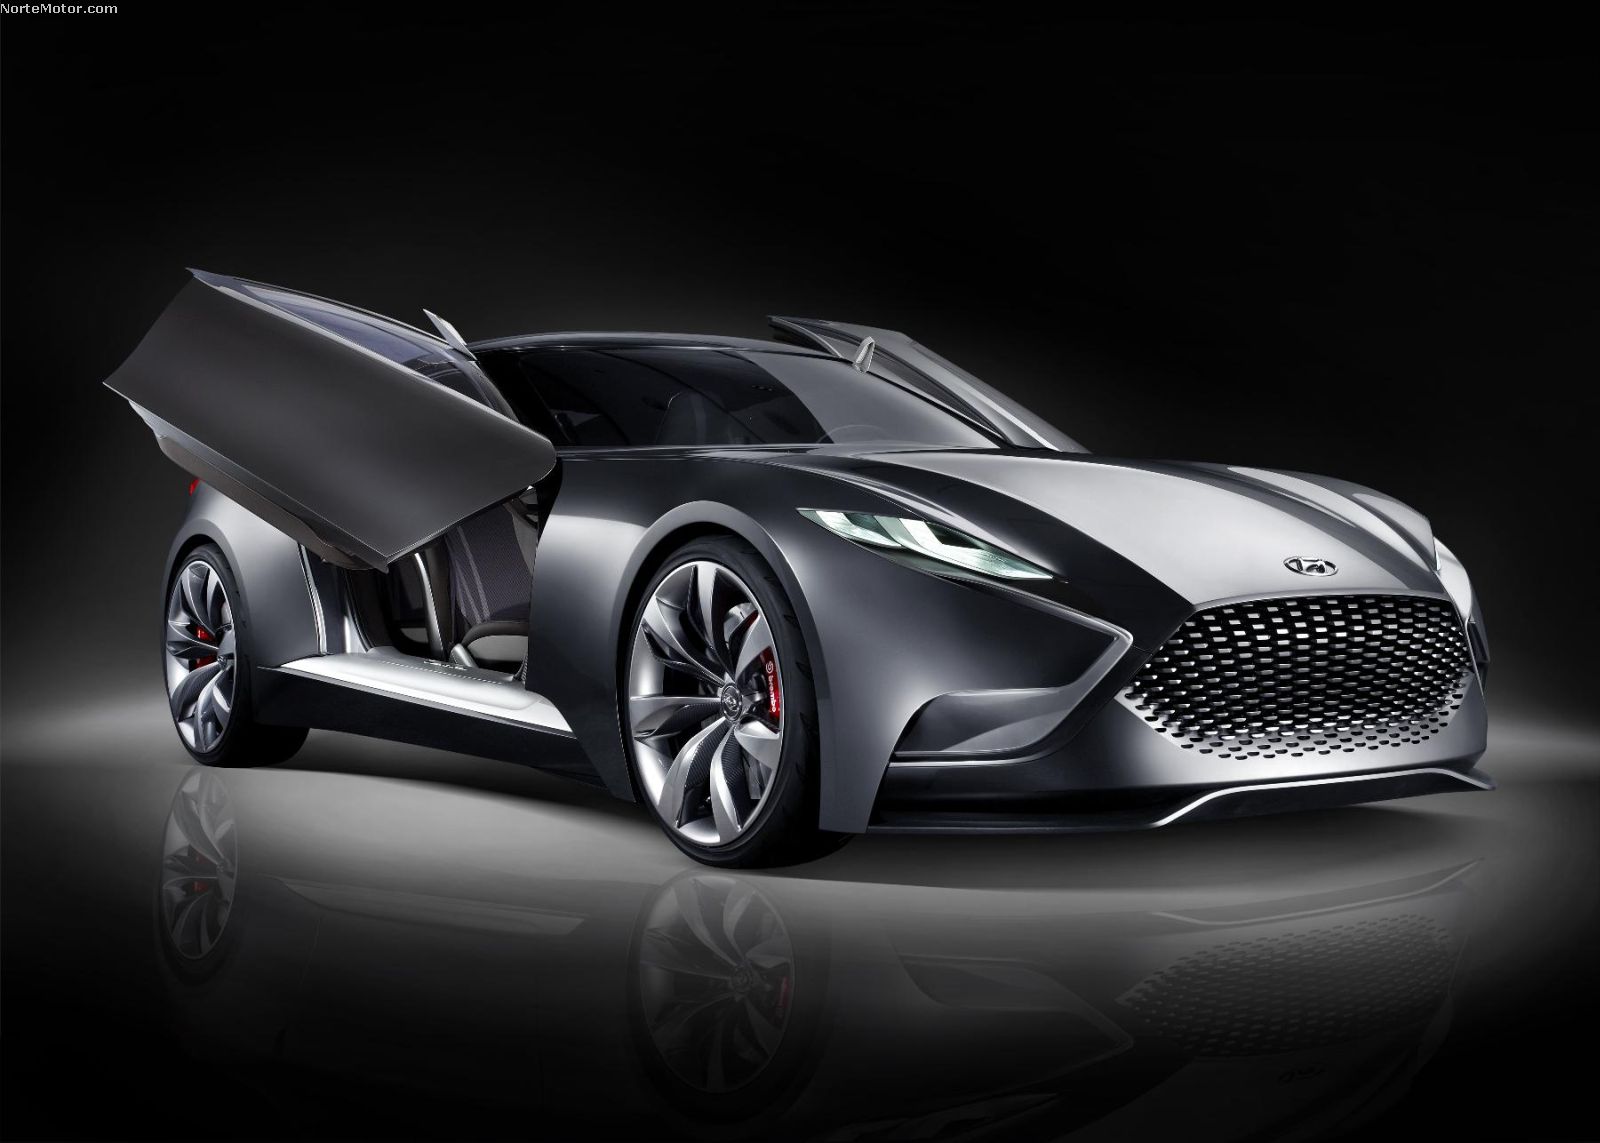 Daily Cars Concept luxury sports coupe Hyundai HND9